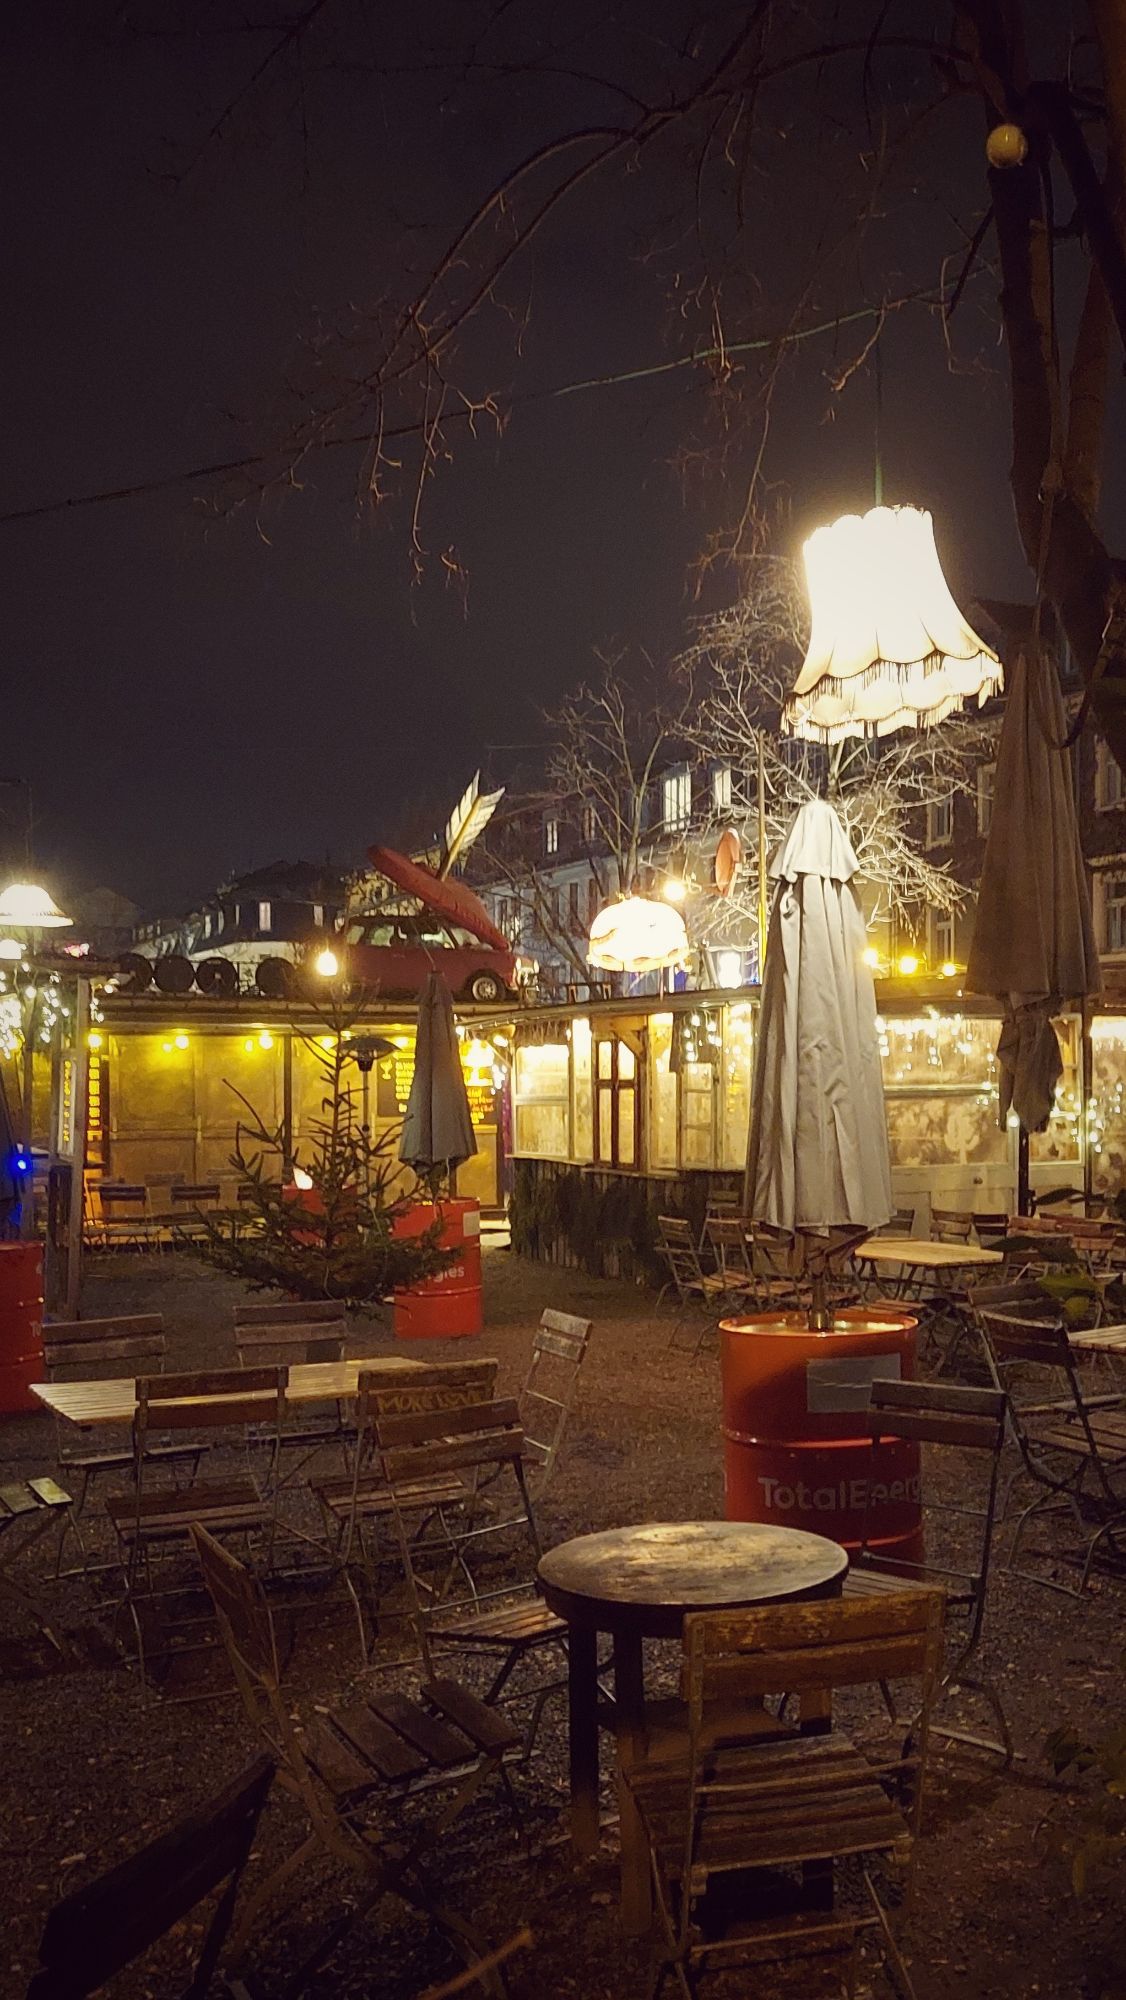 View into an outside bar. Bright lights, a car and living room lamps decorating the scenery. Closed umbrellas, wooden tables and chairs. The location is closed.